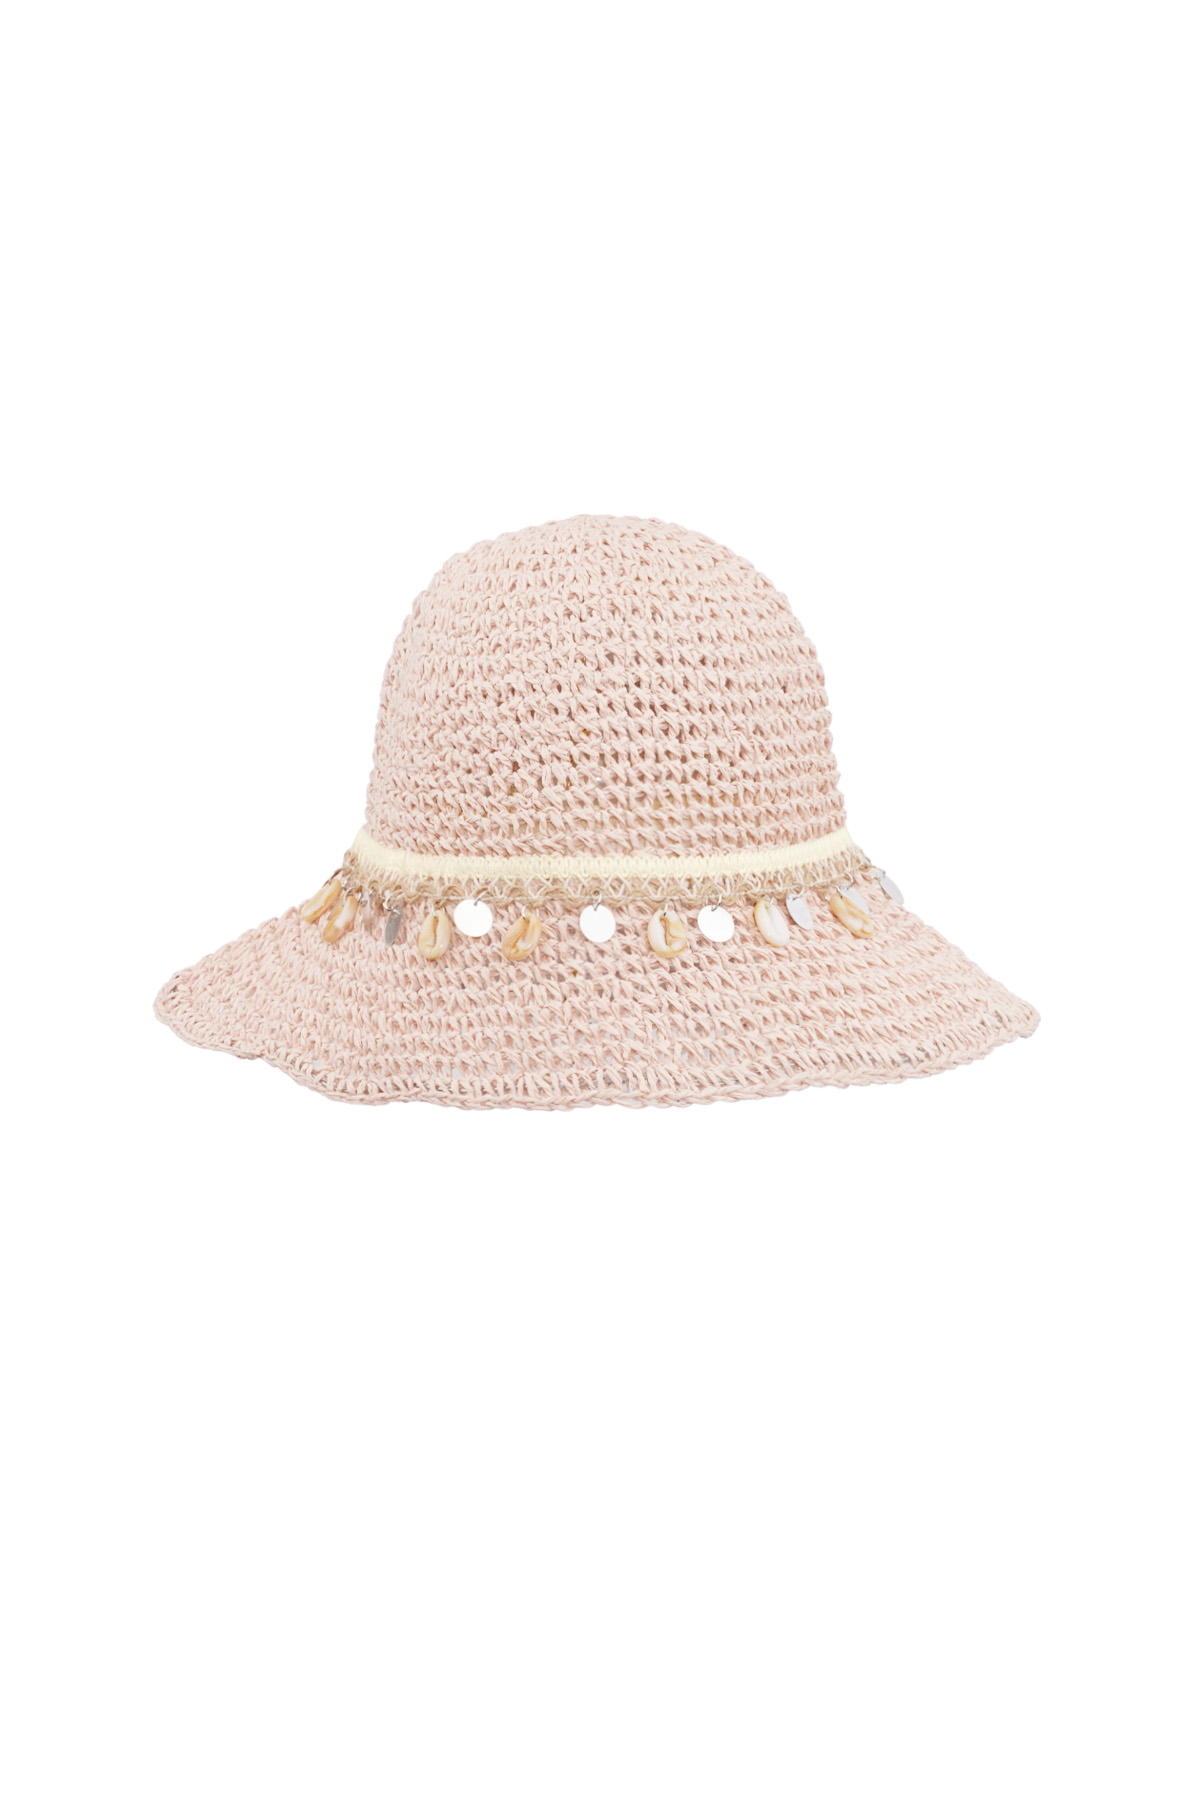 Beach hat with shells - pink h5 